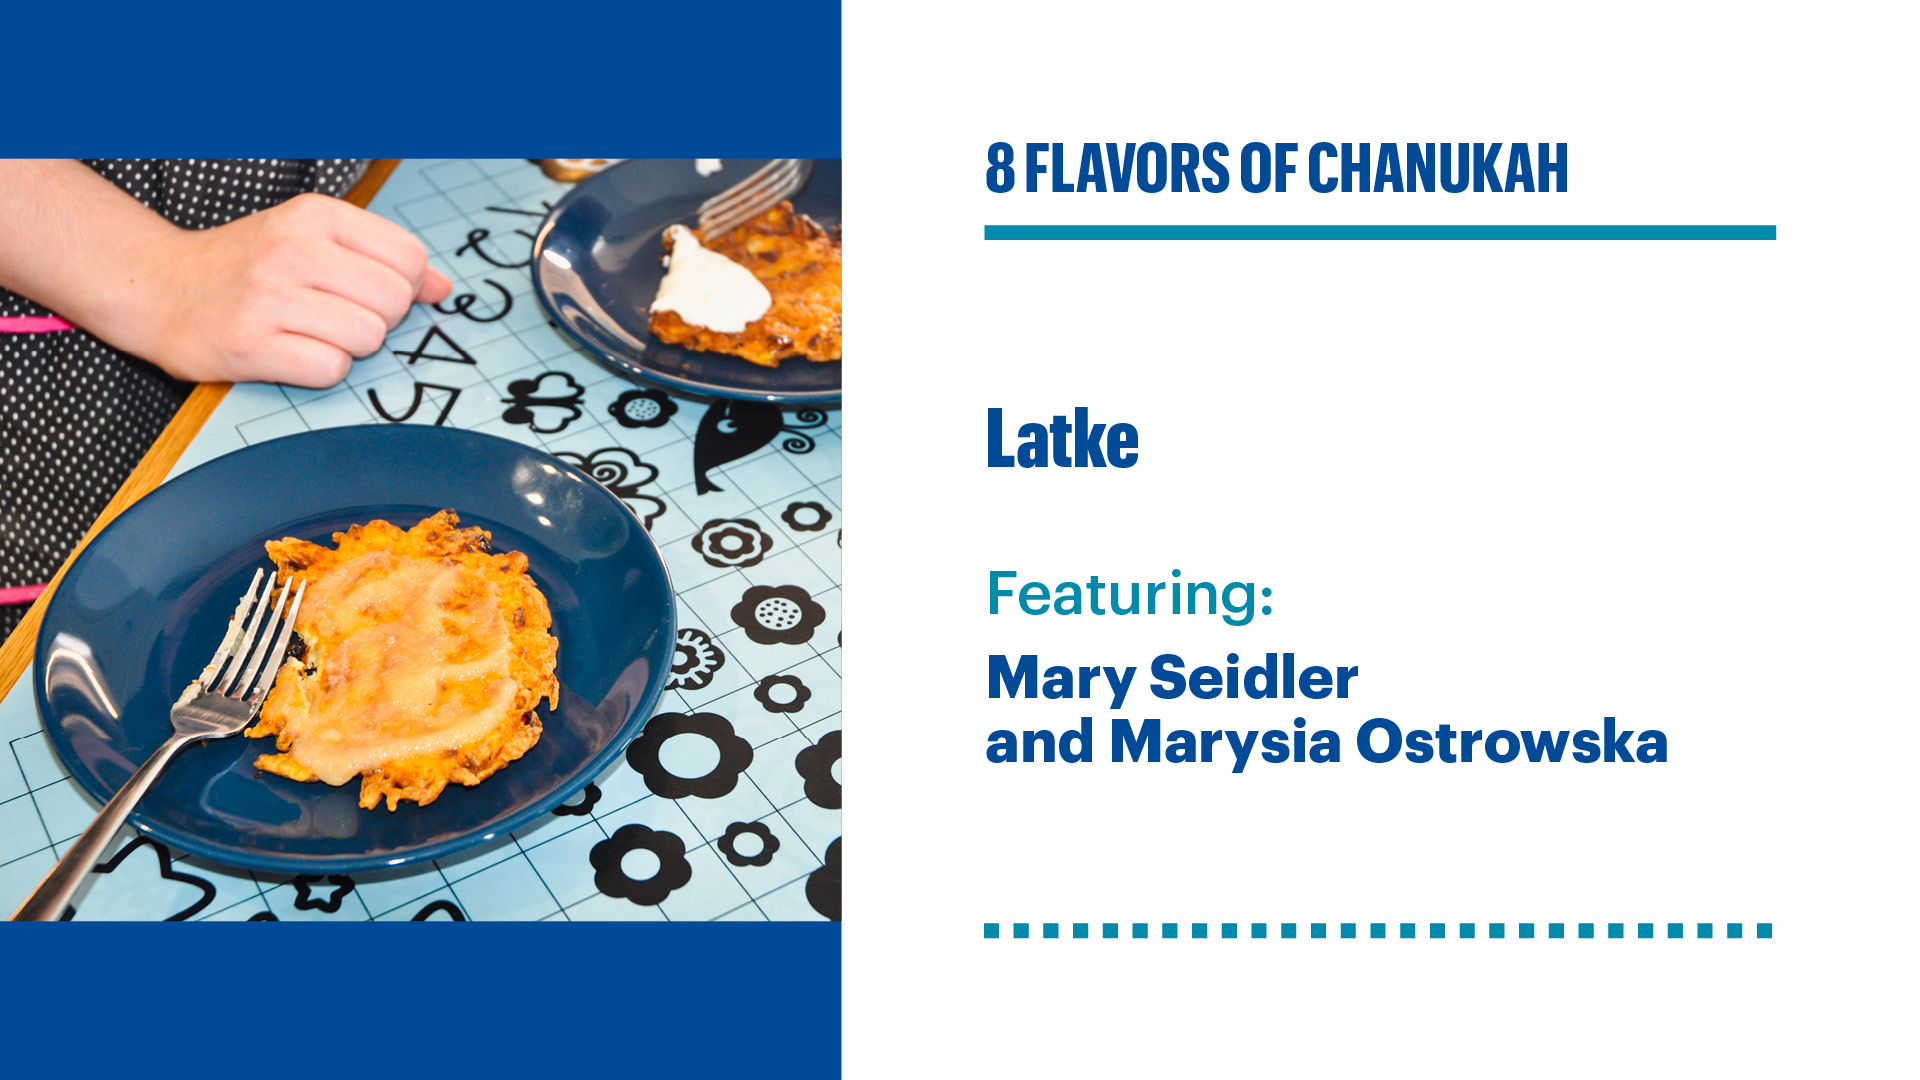 Poster of Latke event. Featuring Mary Seidler and Marysia Ostrowska. On the left side Latke - potato cake on frying pan.